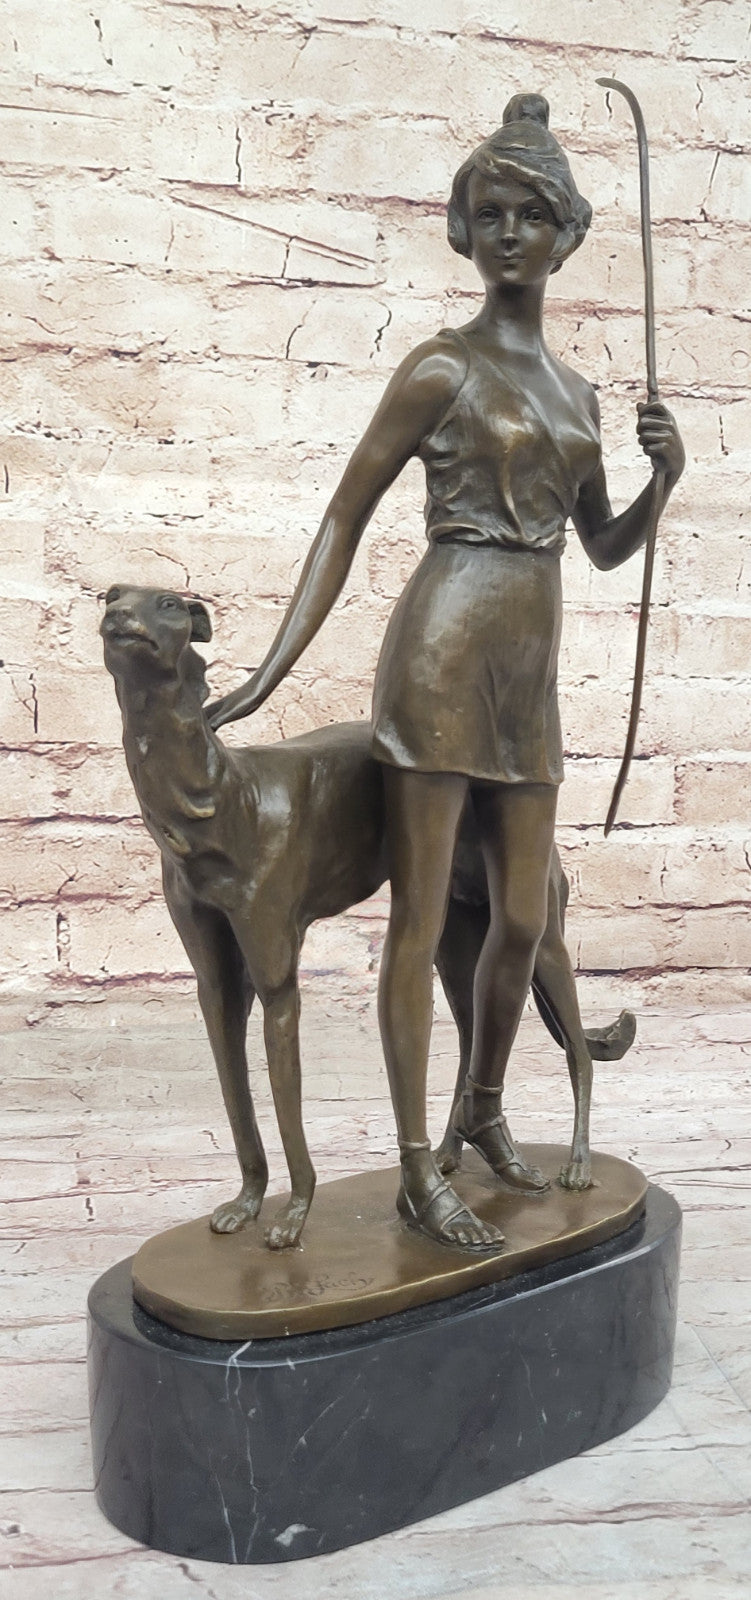 Mythical Bruno Zach Sculpture Diana the Huntress Home Office Decor